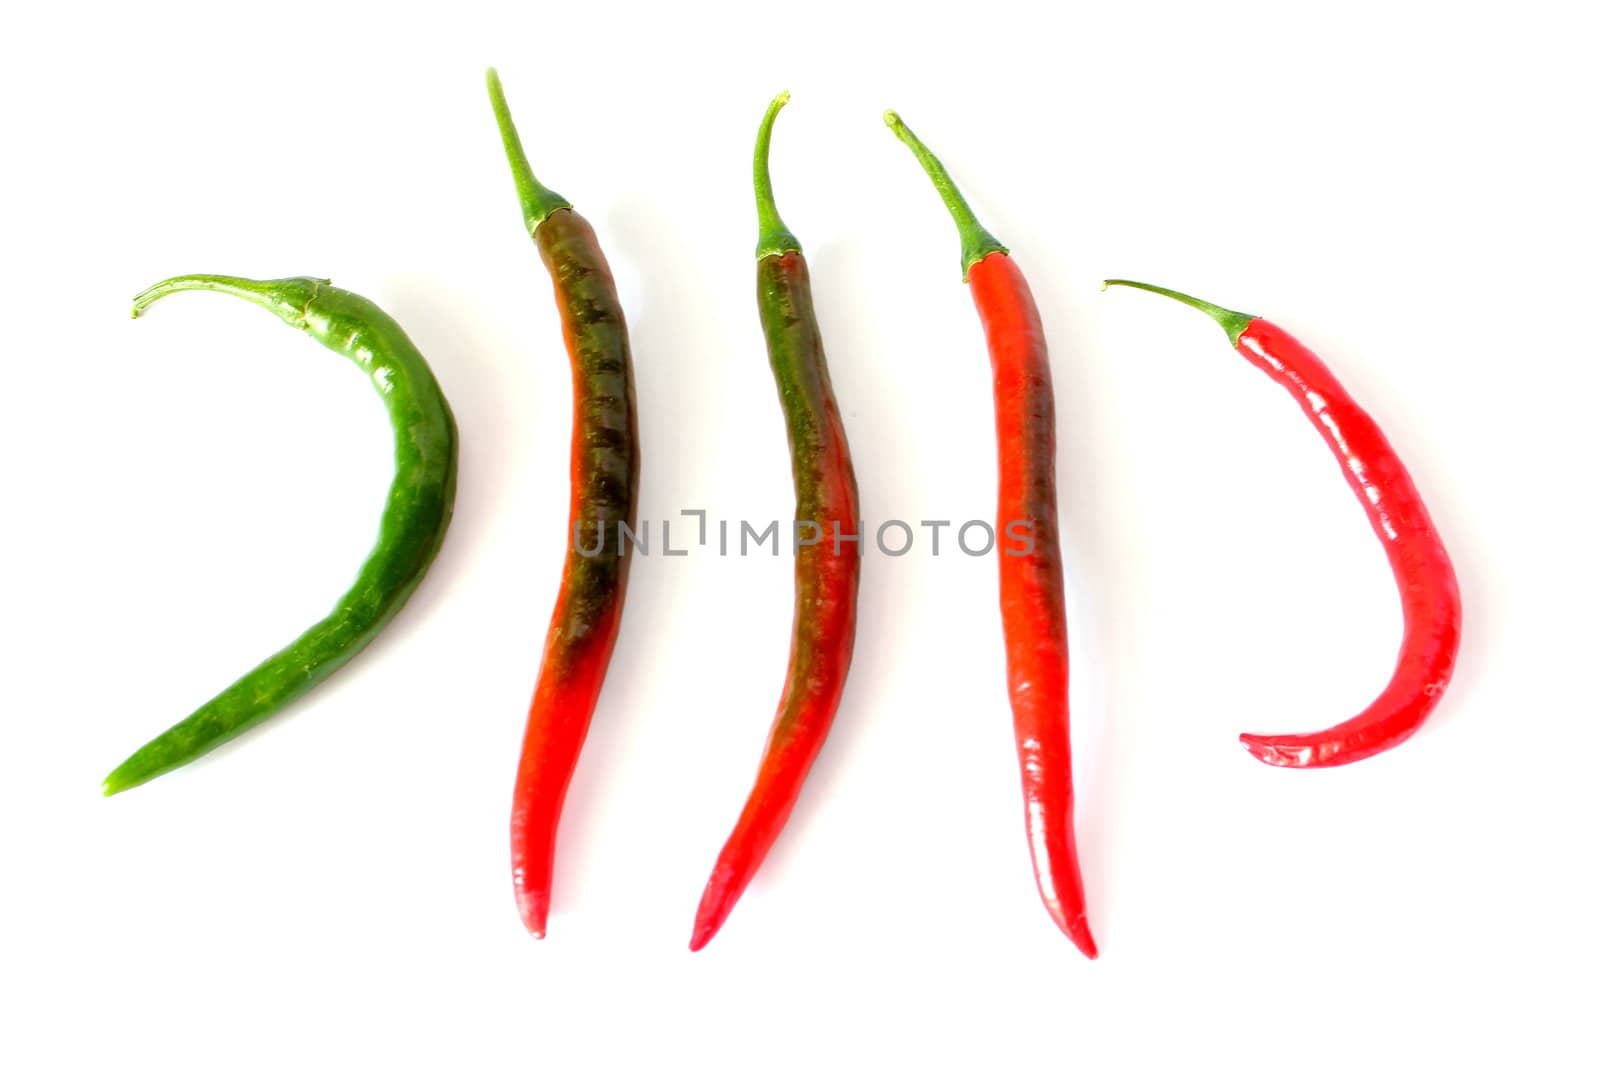 Isolated cayenne peppers lined up from unripe to ripe.